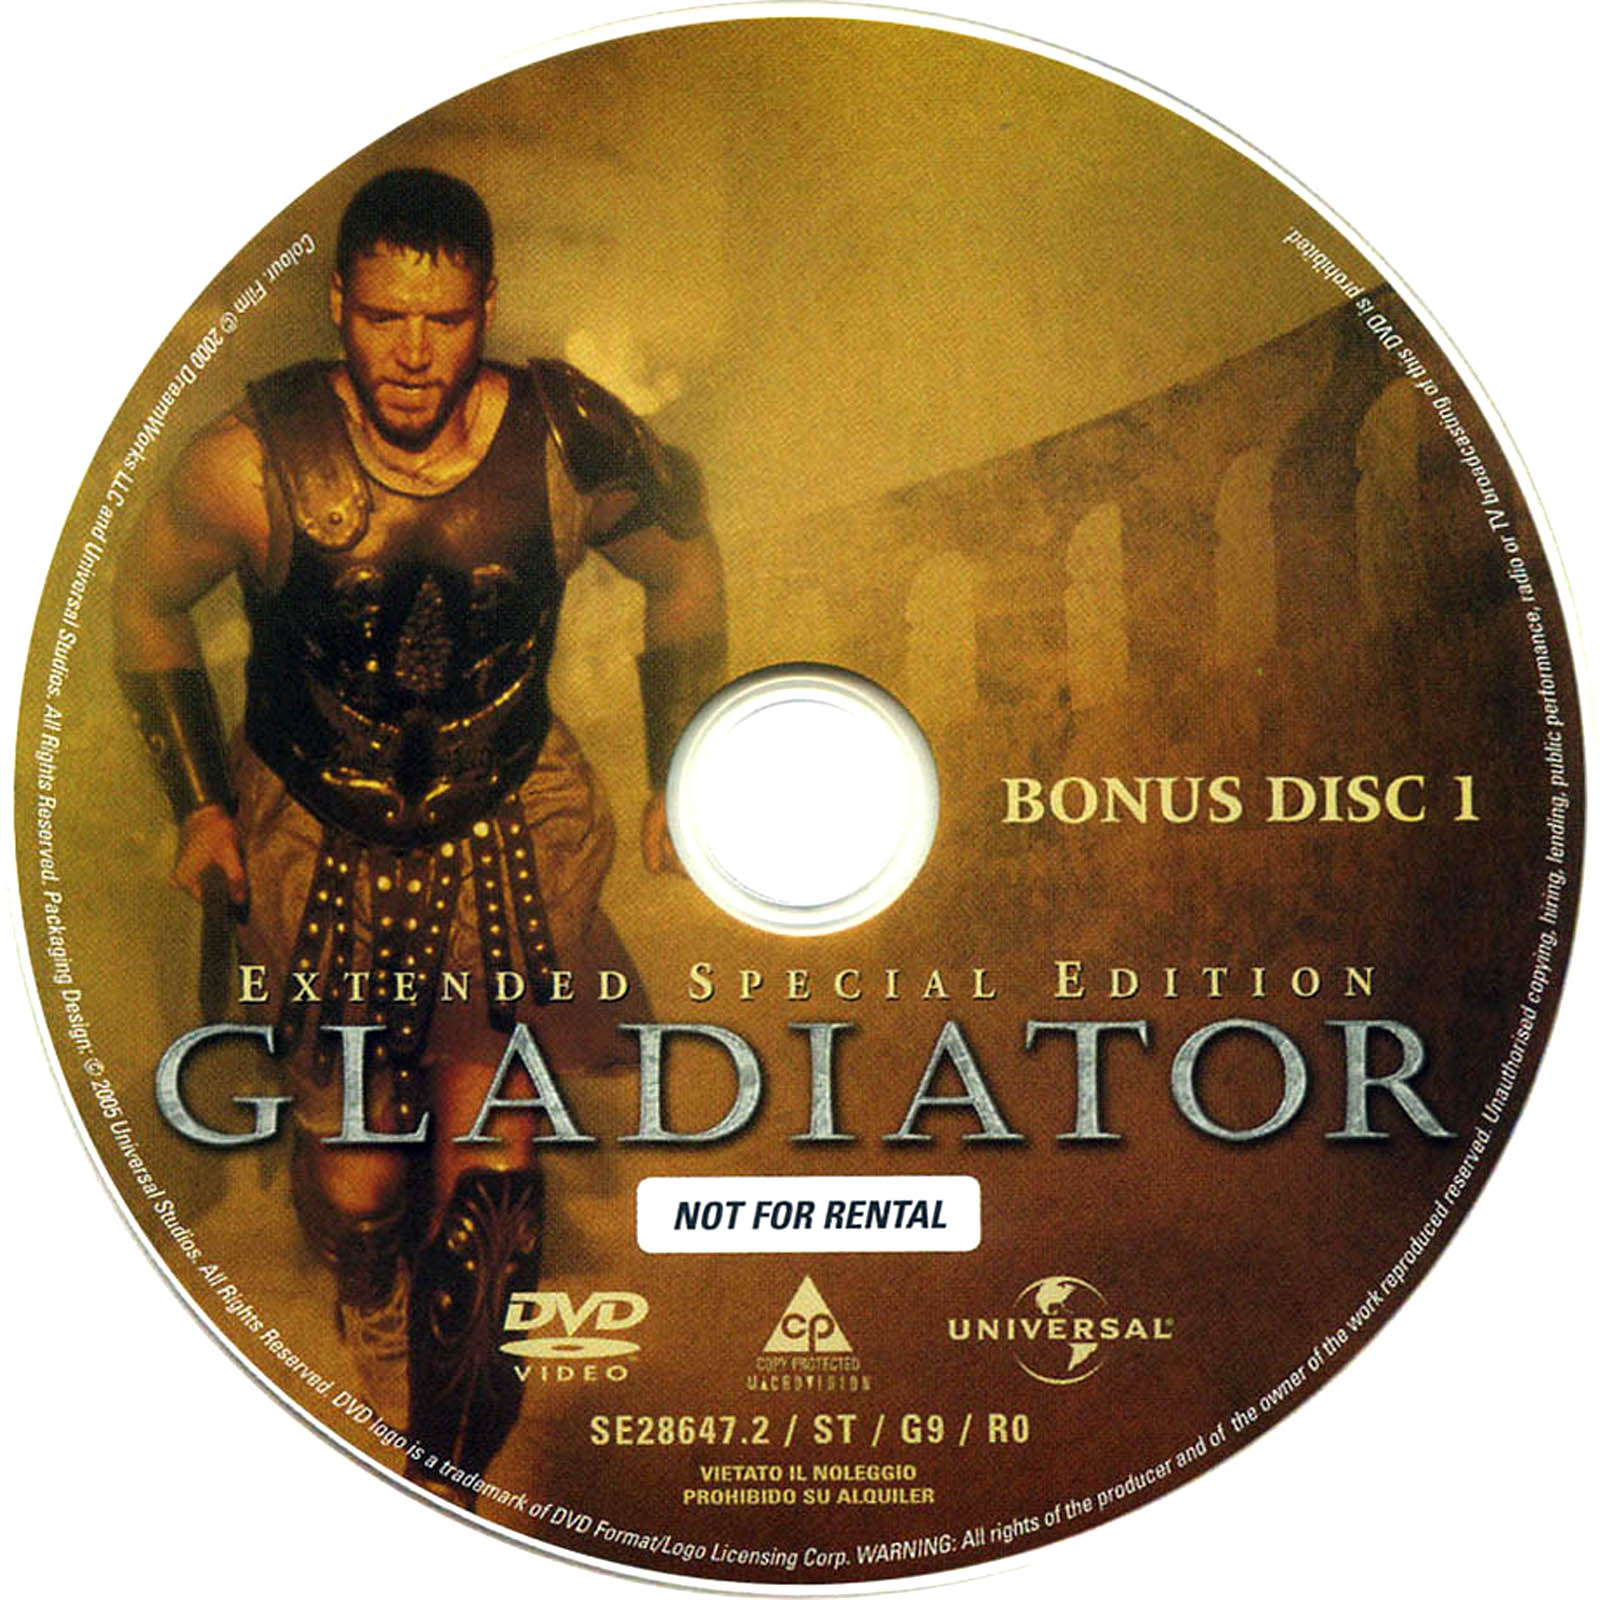 Gladiator (2000) | Movie Poster and DVD Cover Art1600 x 1600